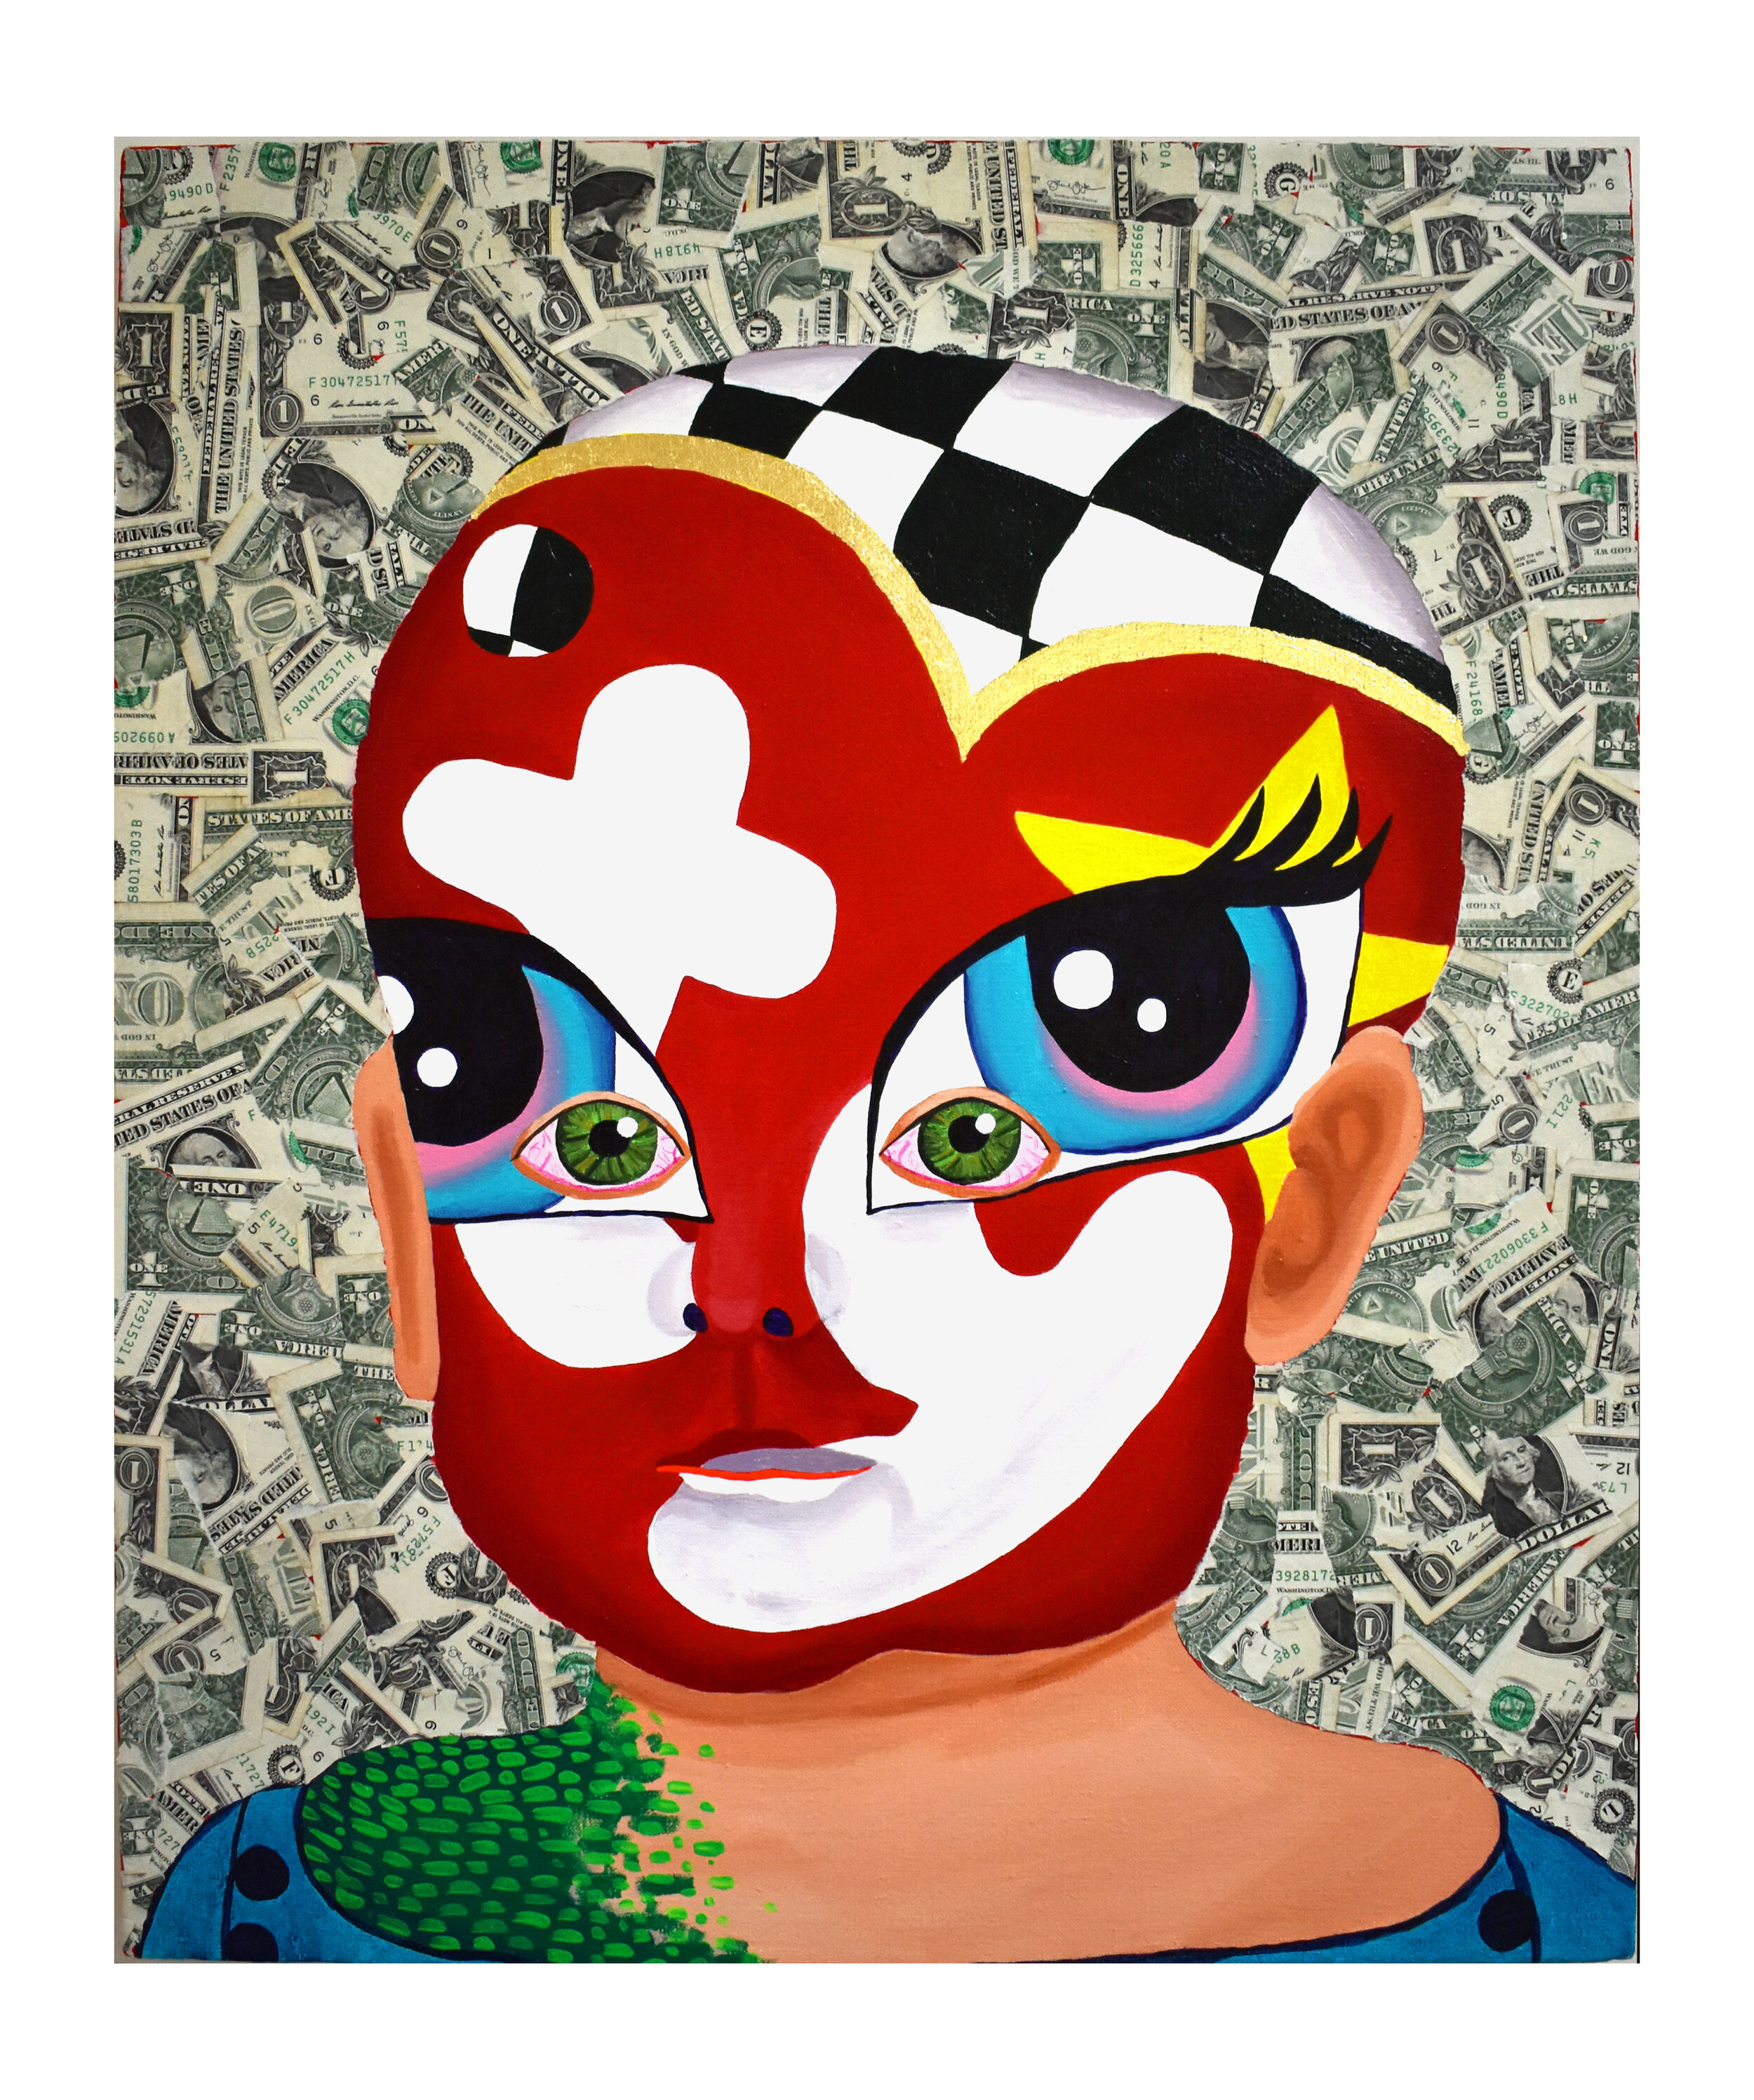   Beanie Baby Face Painted Baby , 2019  20 x 24 x 1.5 inches (50.8 x 60.96 x 3.81 cm.)  Acrylic, gold leaf, and dollar bills on linen  Private collection, Los Angeles 